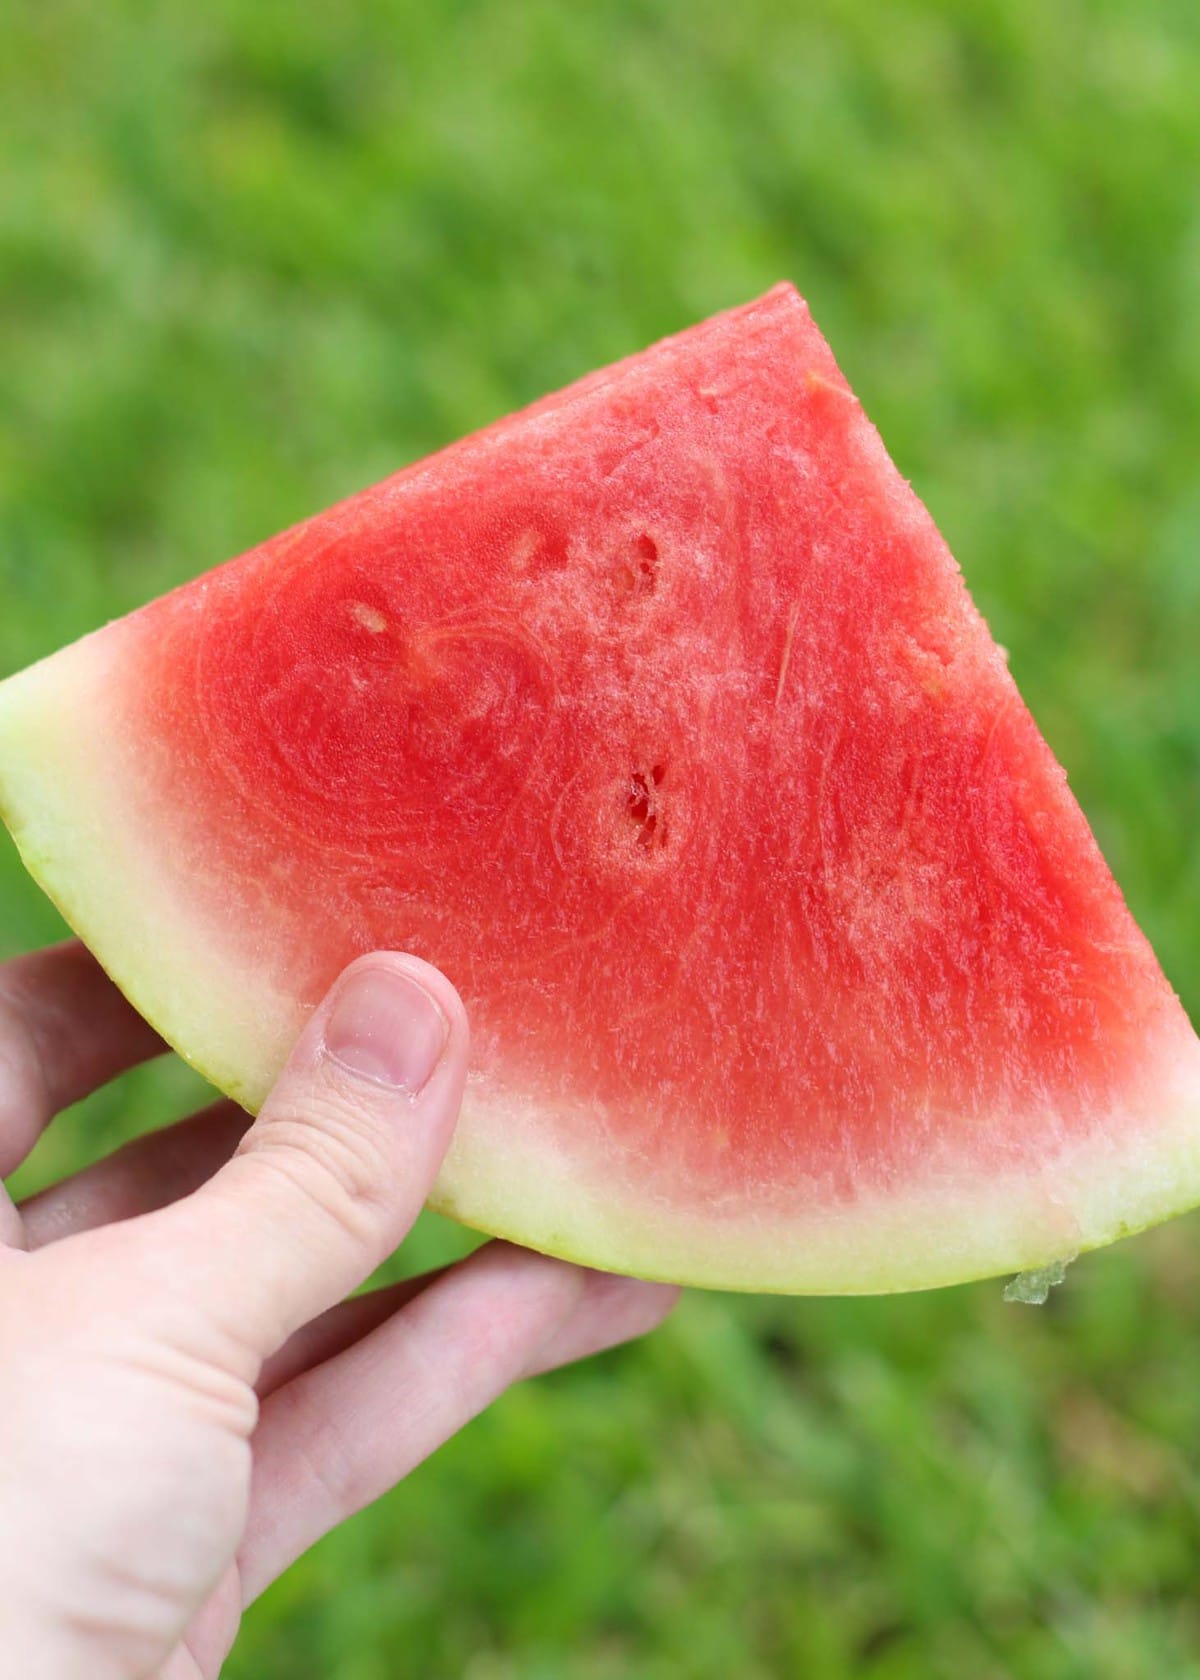 A ripe and juicy slice of perfectly picked watermelon.